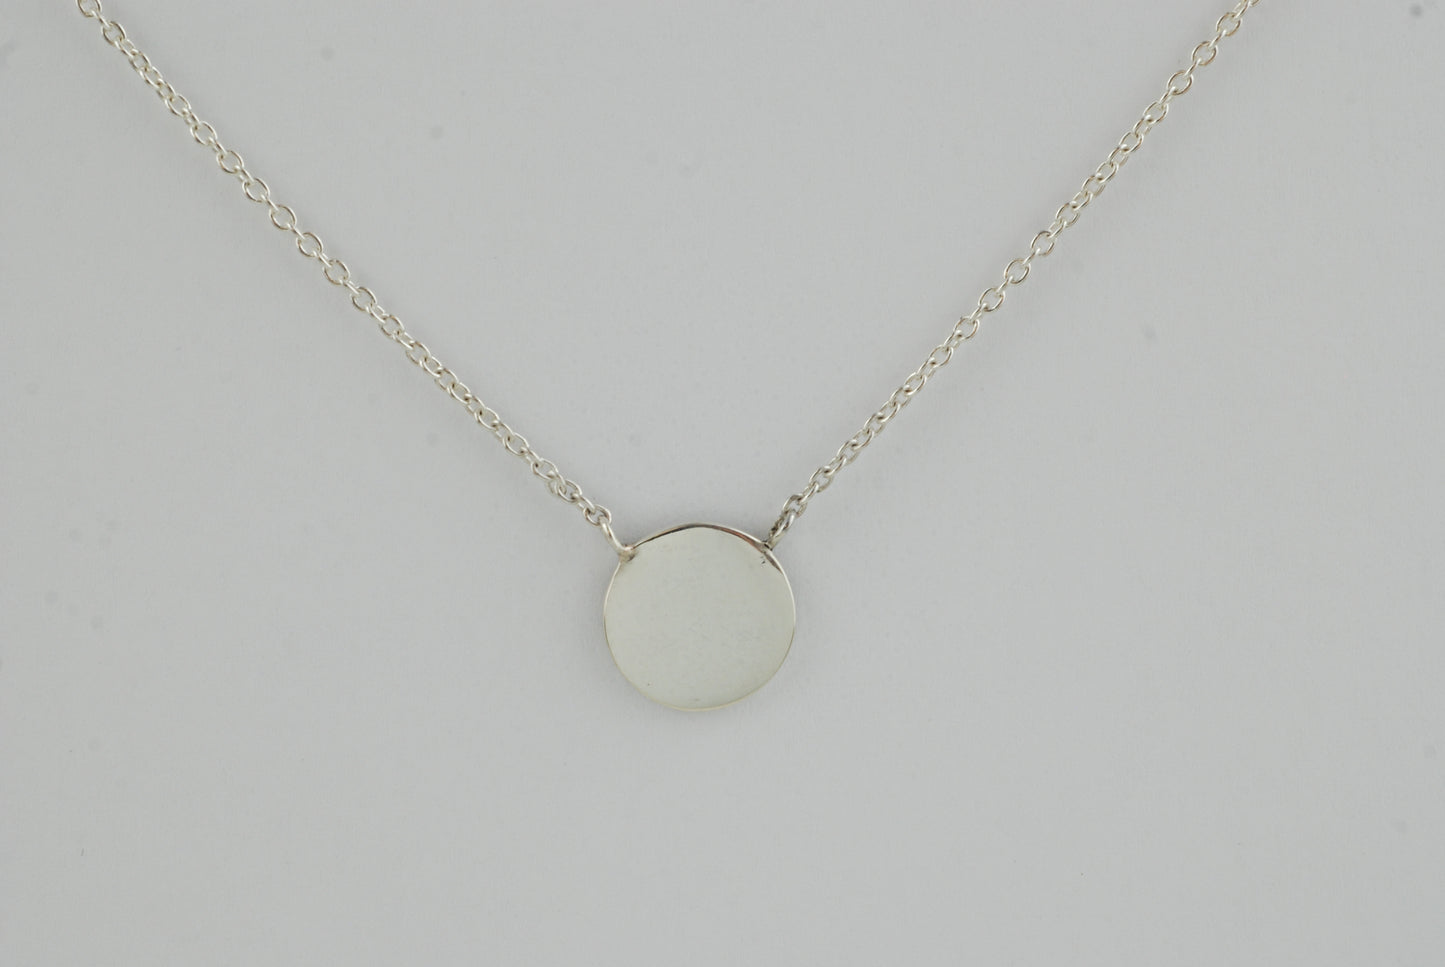 Statement Sterling Silver Circle Necklace with Woven Texture